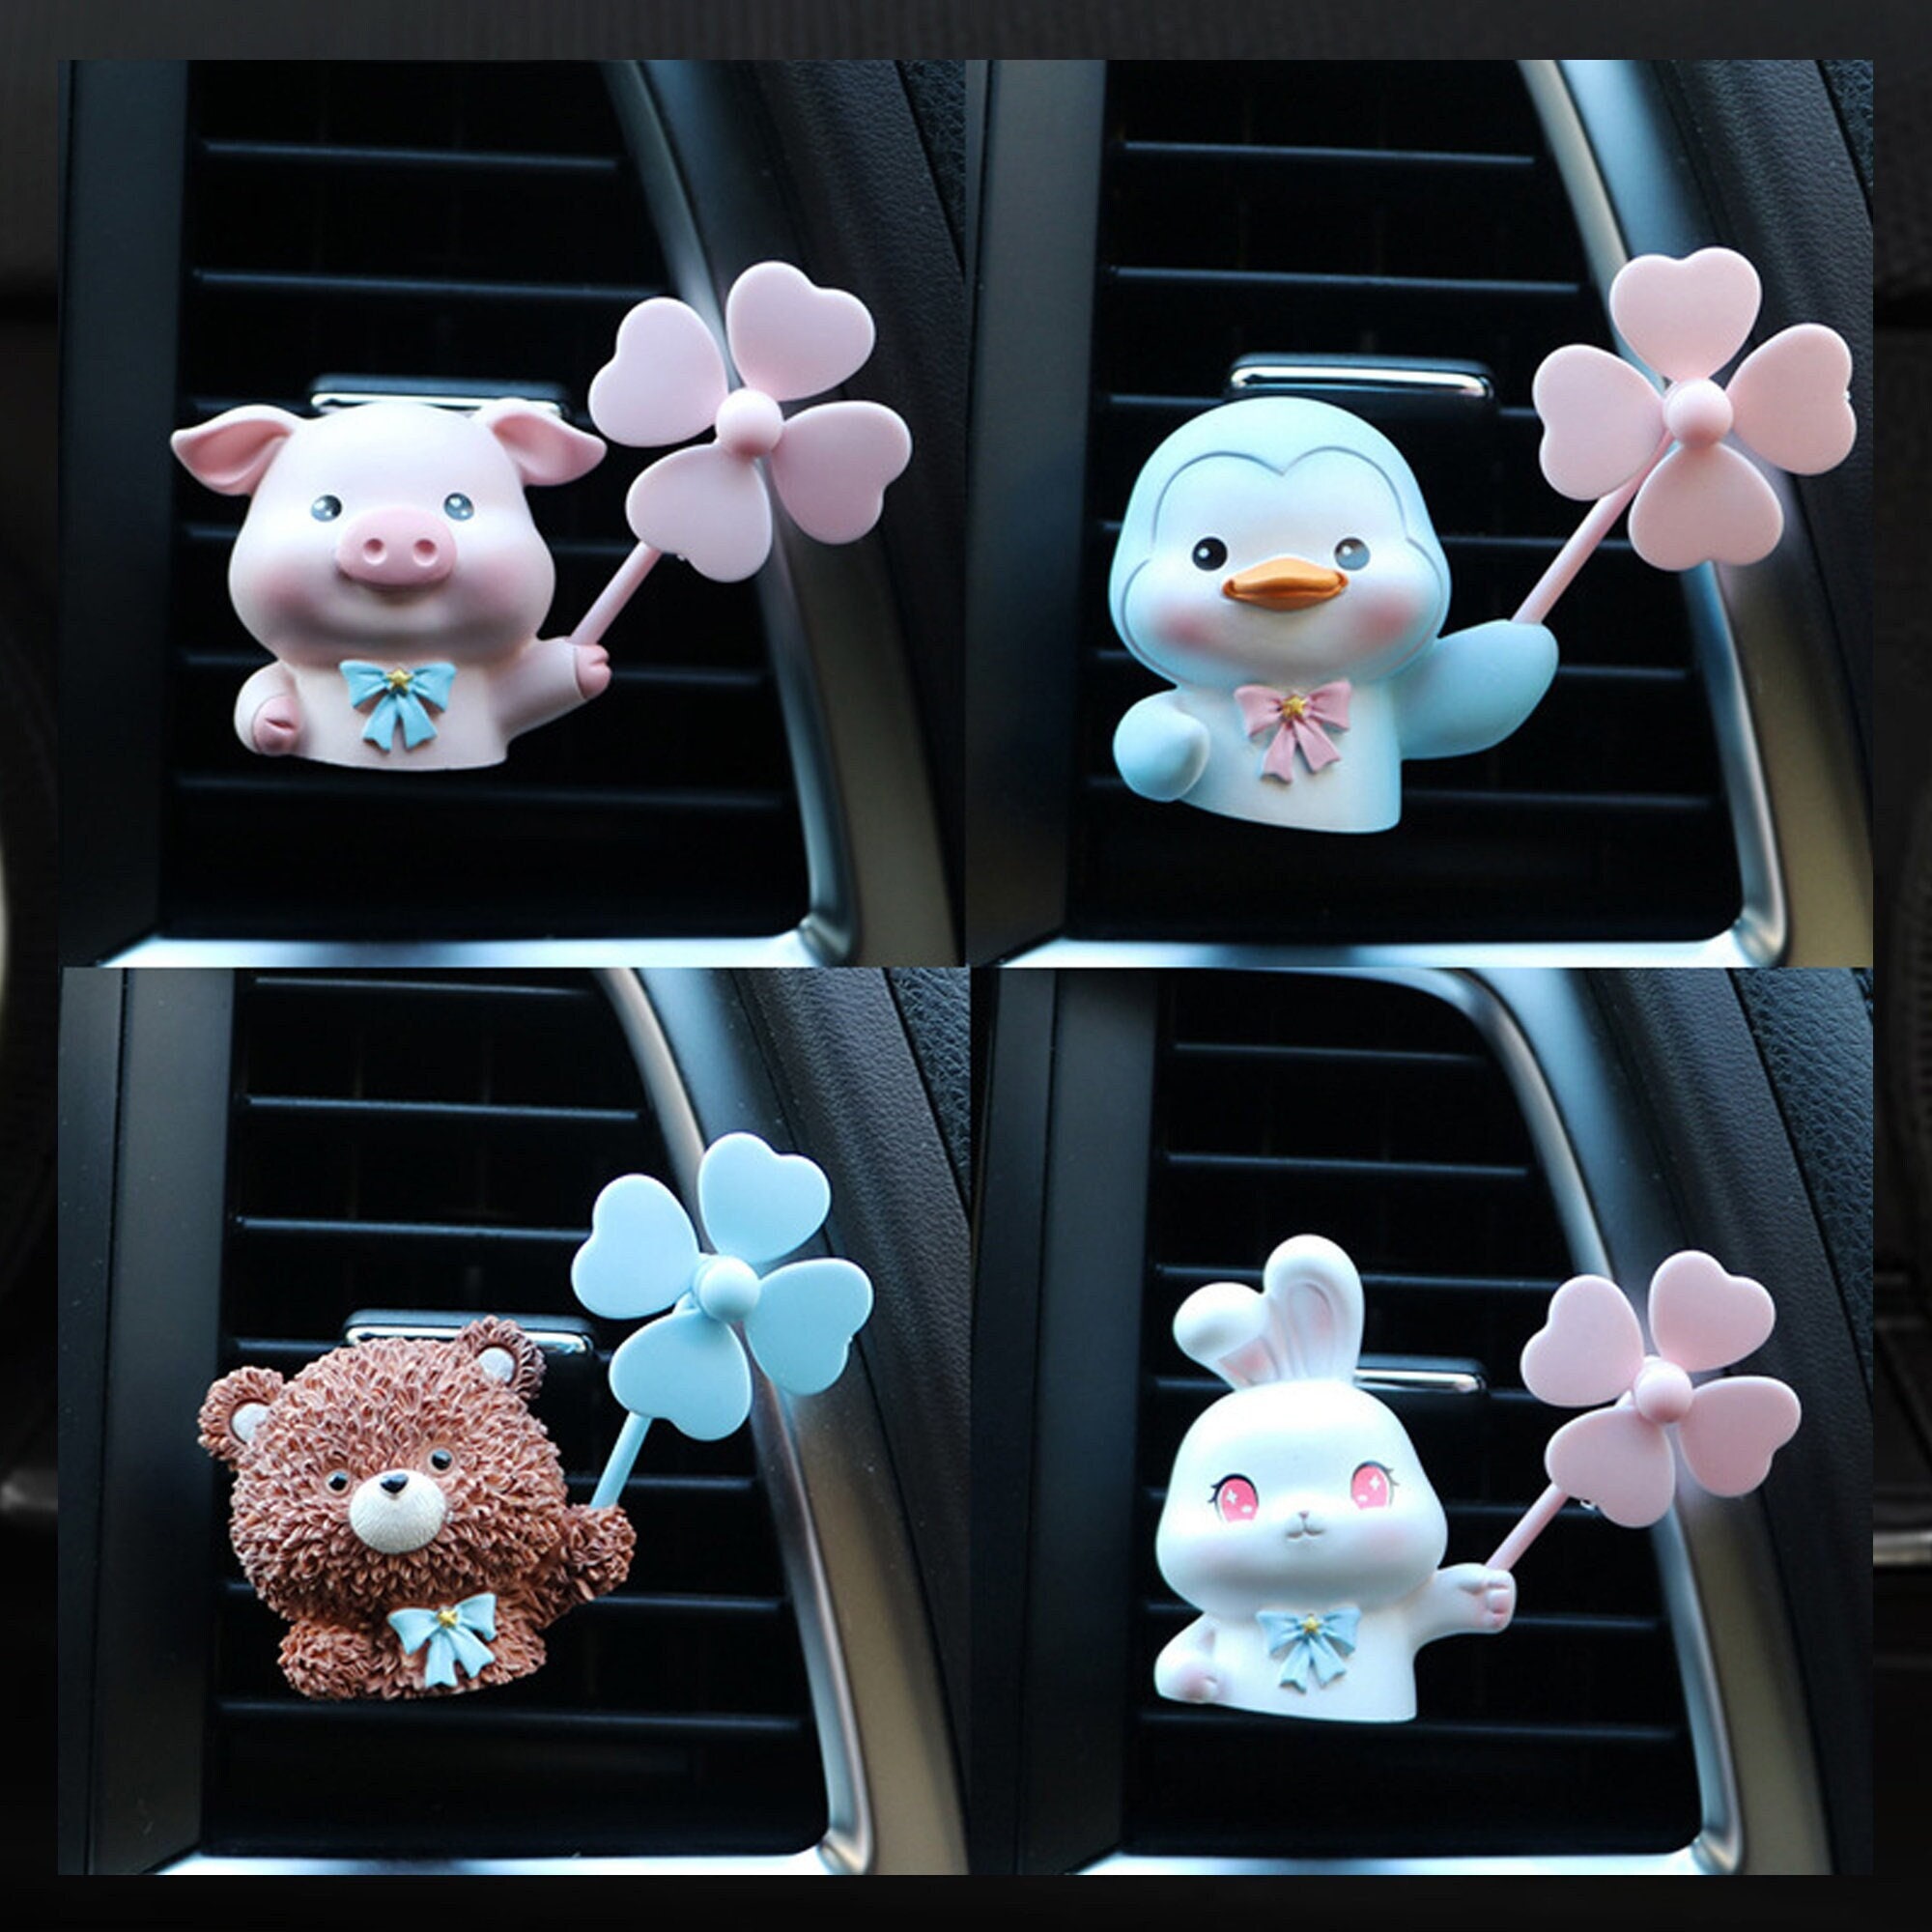 TWO Cute Pilot Bear car air freshener, UK Stock With 2 Fragrance Tablets.